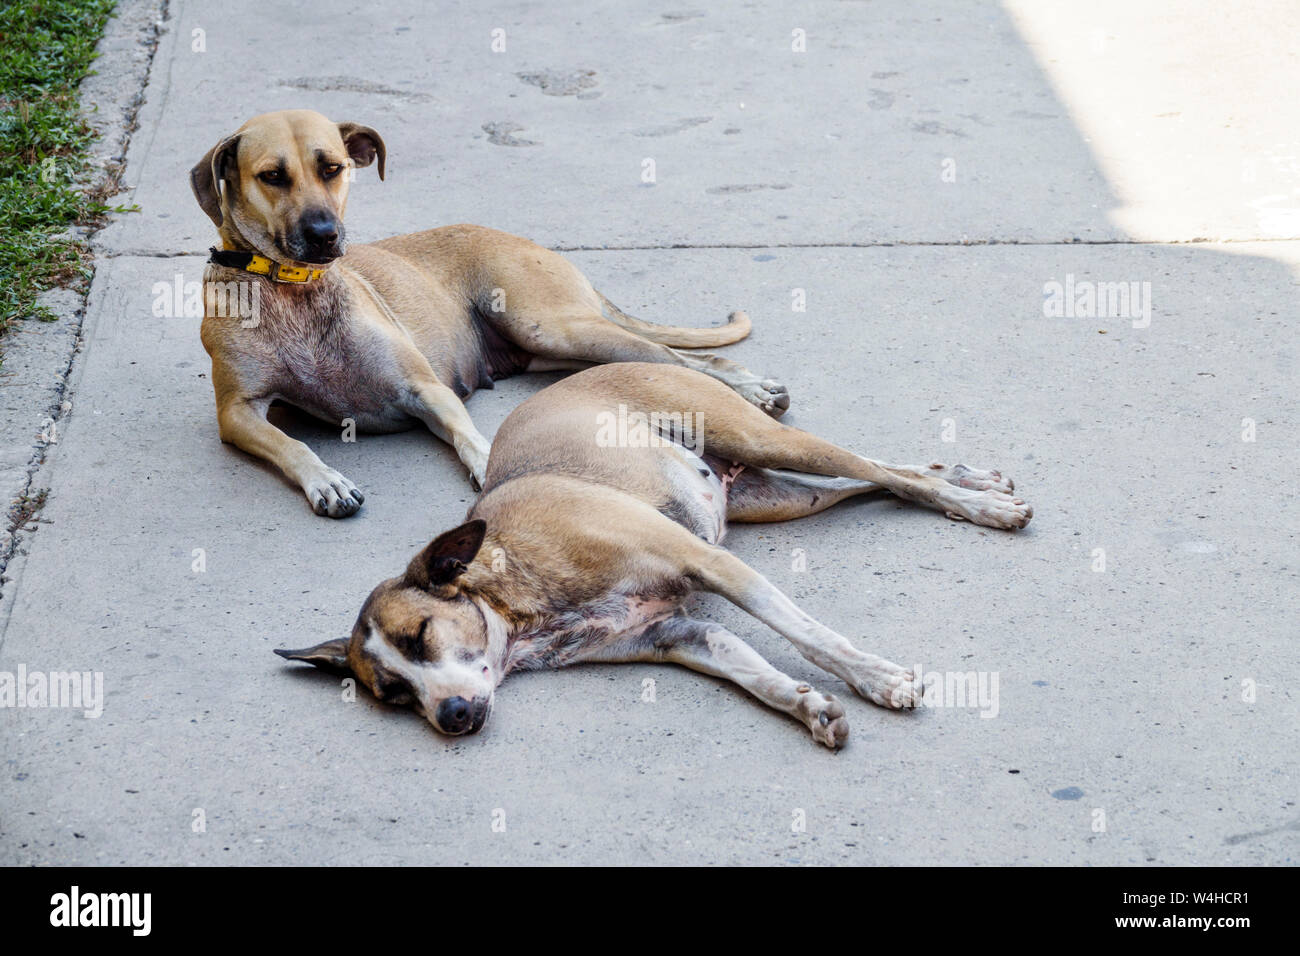 Colombia Cartagena Old Walled City Center centre Getsemani street dogs mutts sleeping on sidewalk sightseeing visitors travel traveling tour to Stock Photo